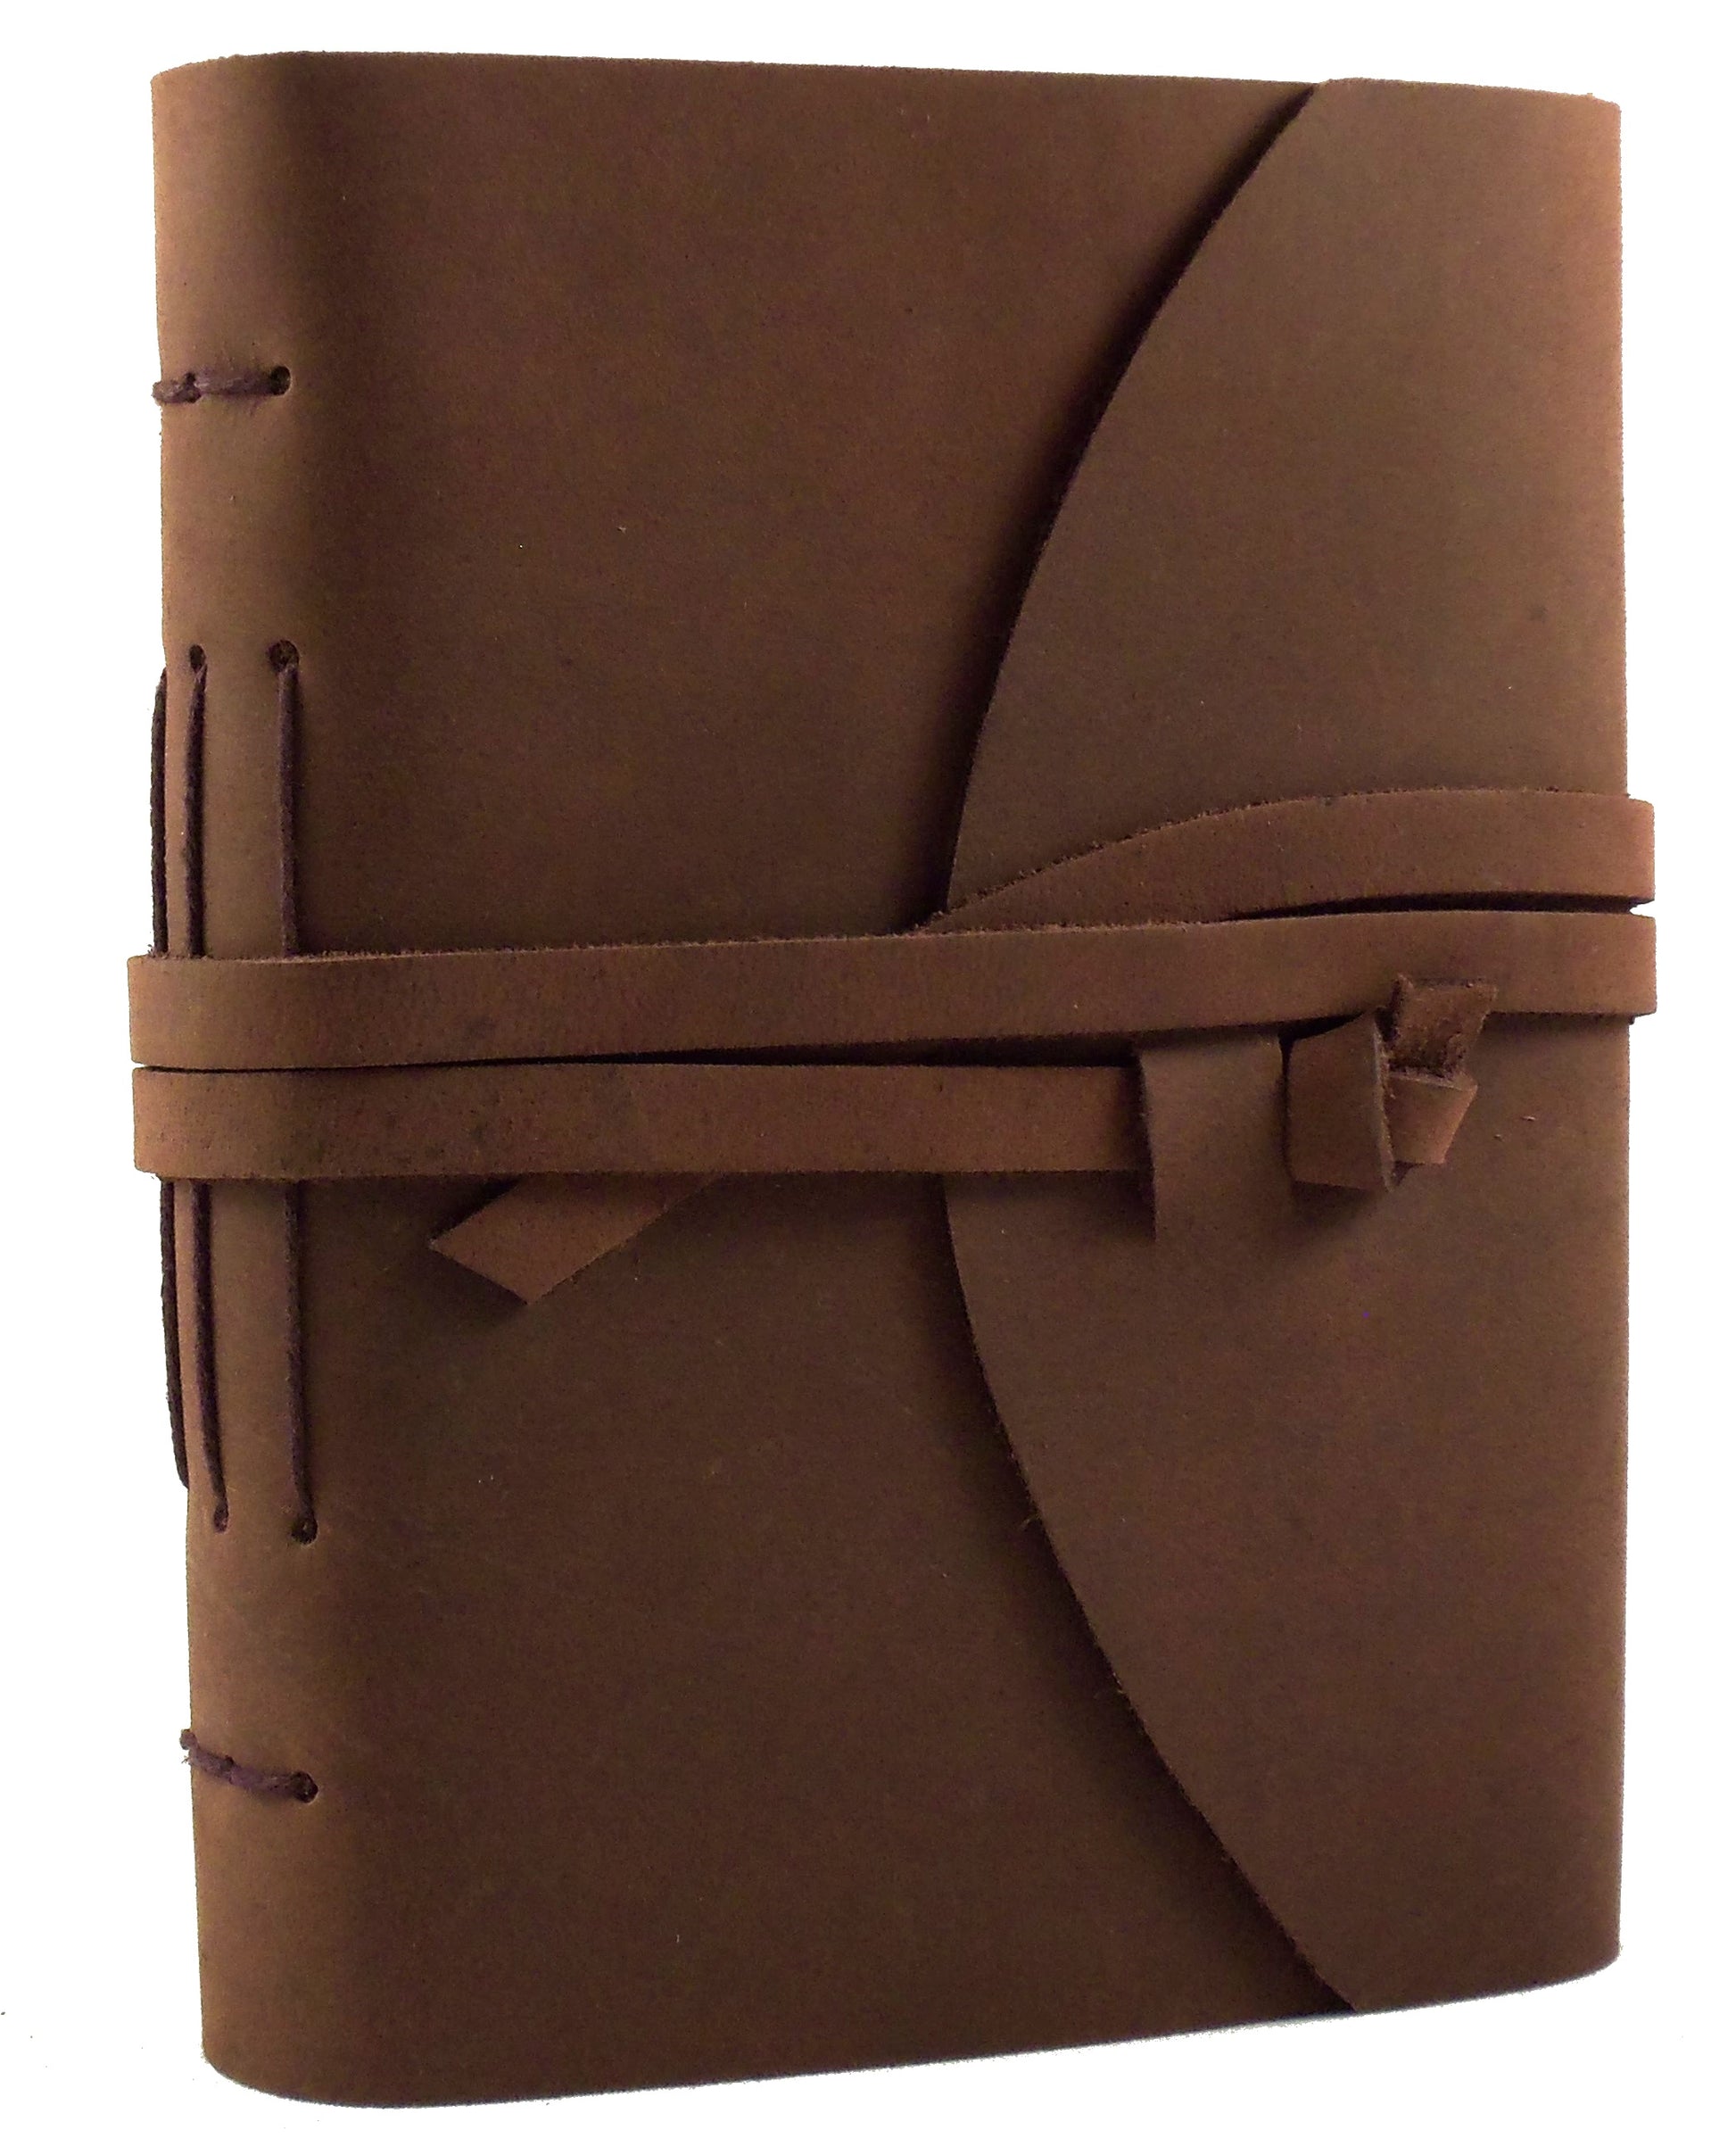 Genuine Leather Legacy Journal - 400 Pages - 5x7" - Rustic Ridge Leather